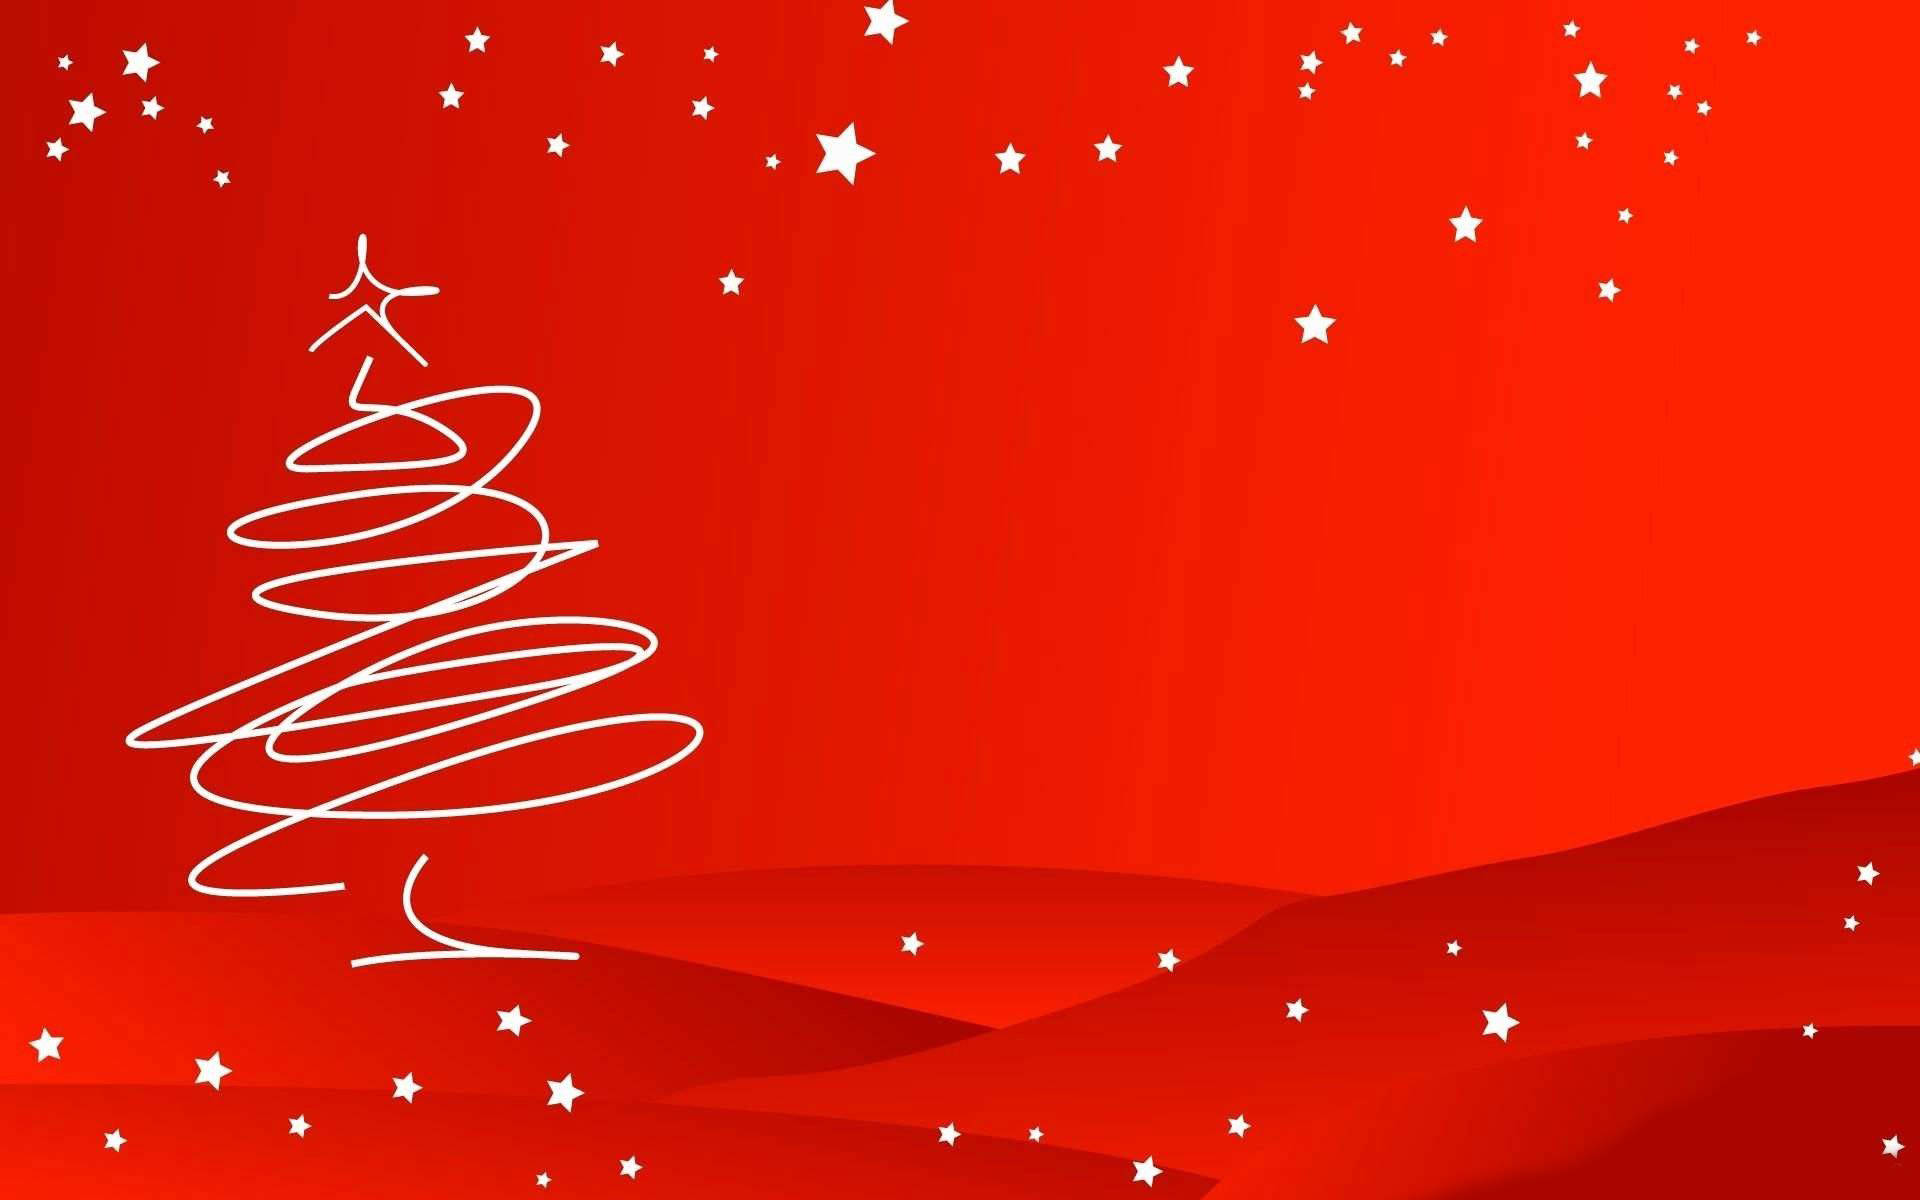 Minimalistic Red and White Christmas Background Wallpaper